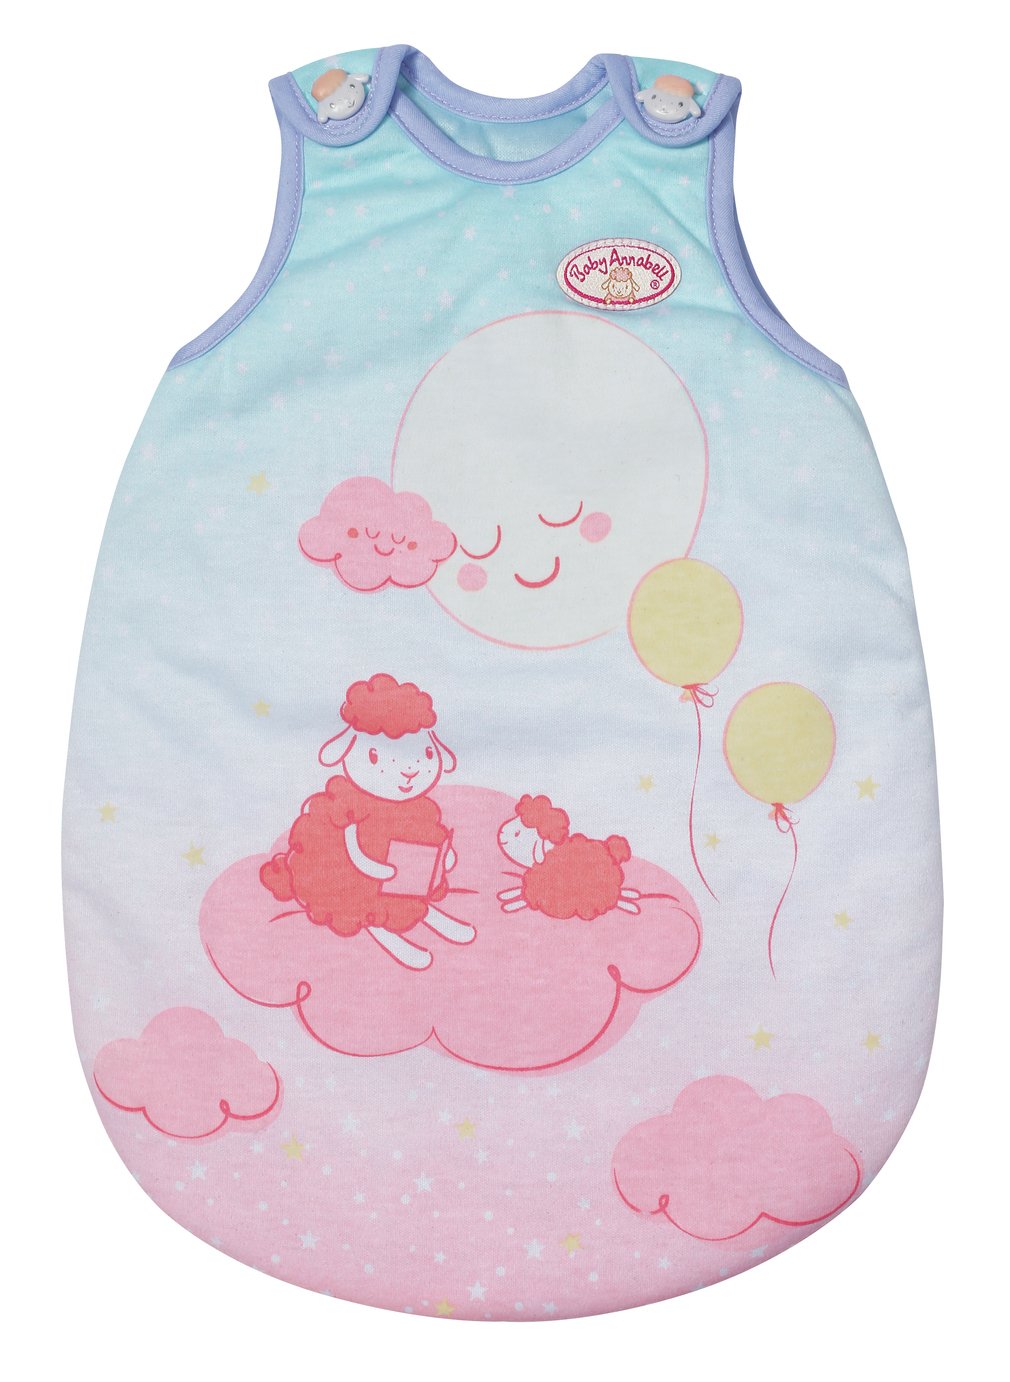 Baby Annabell Sweet Dreams Sleeping Bag Review